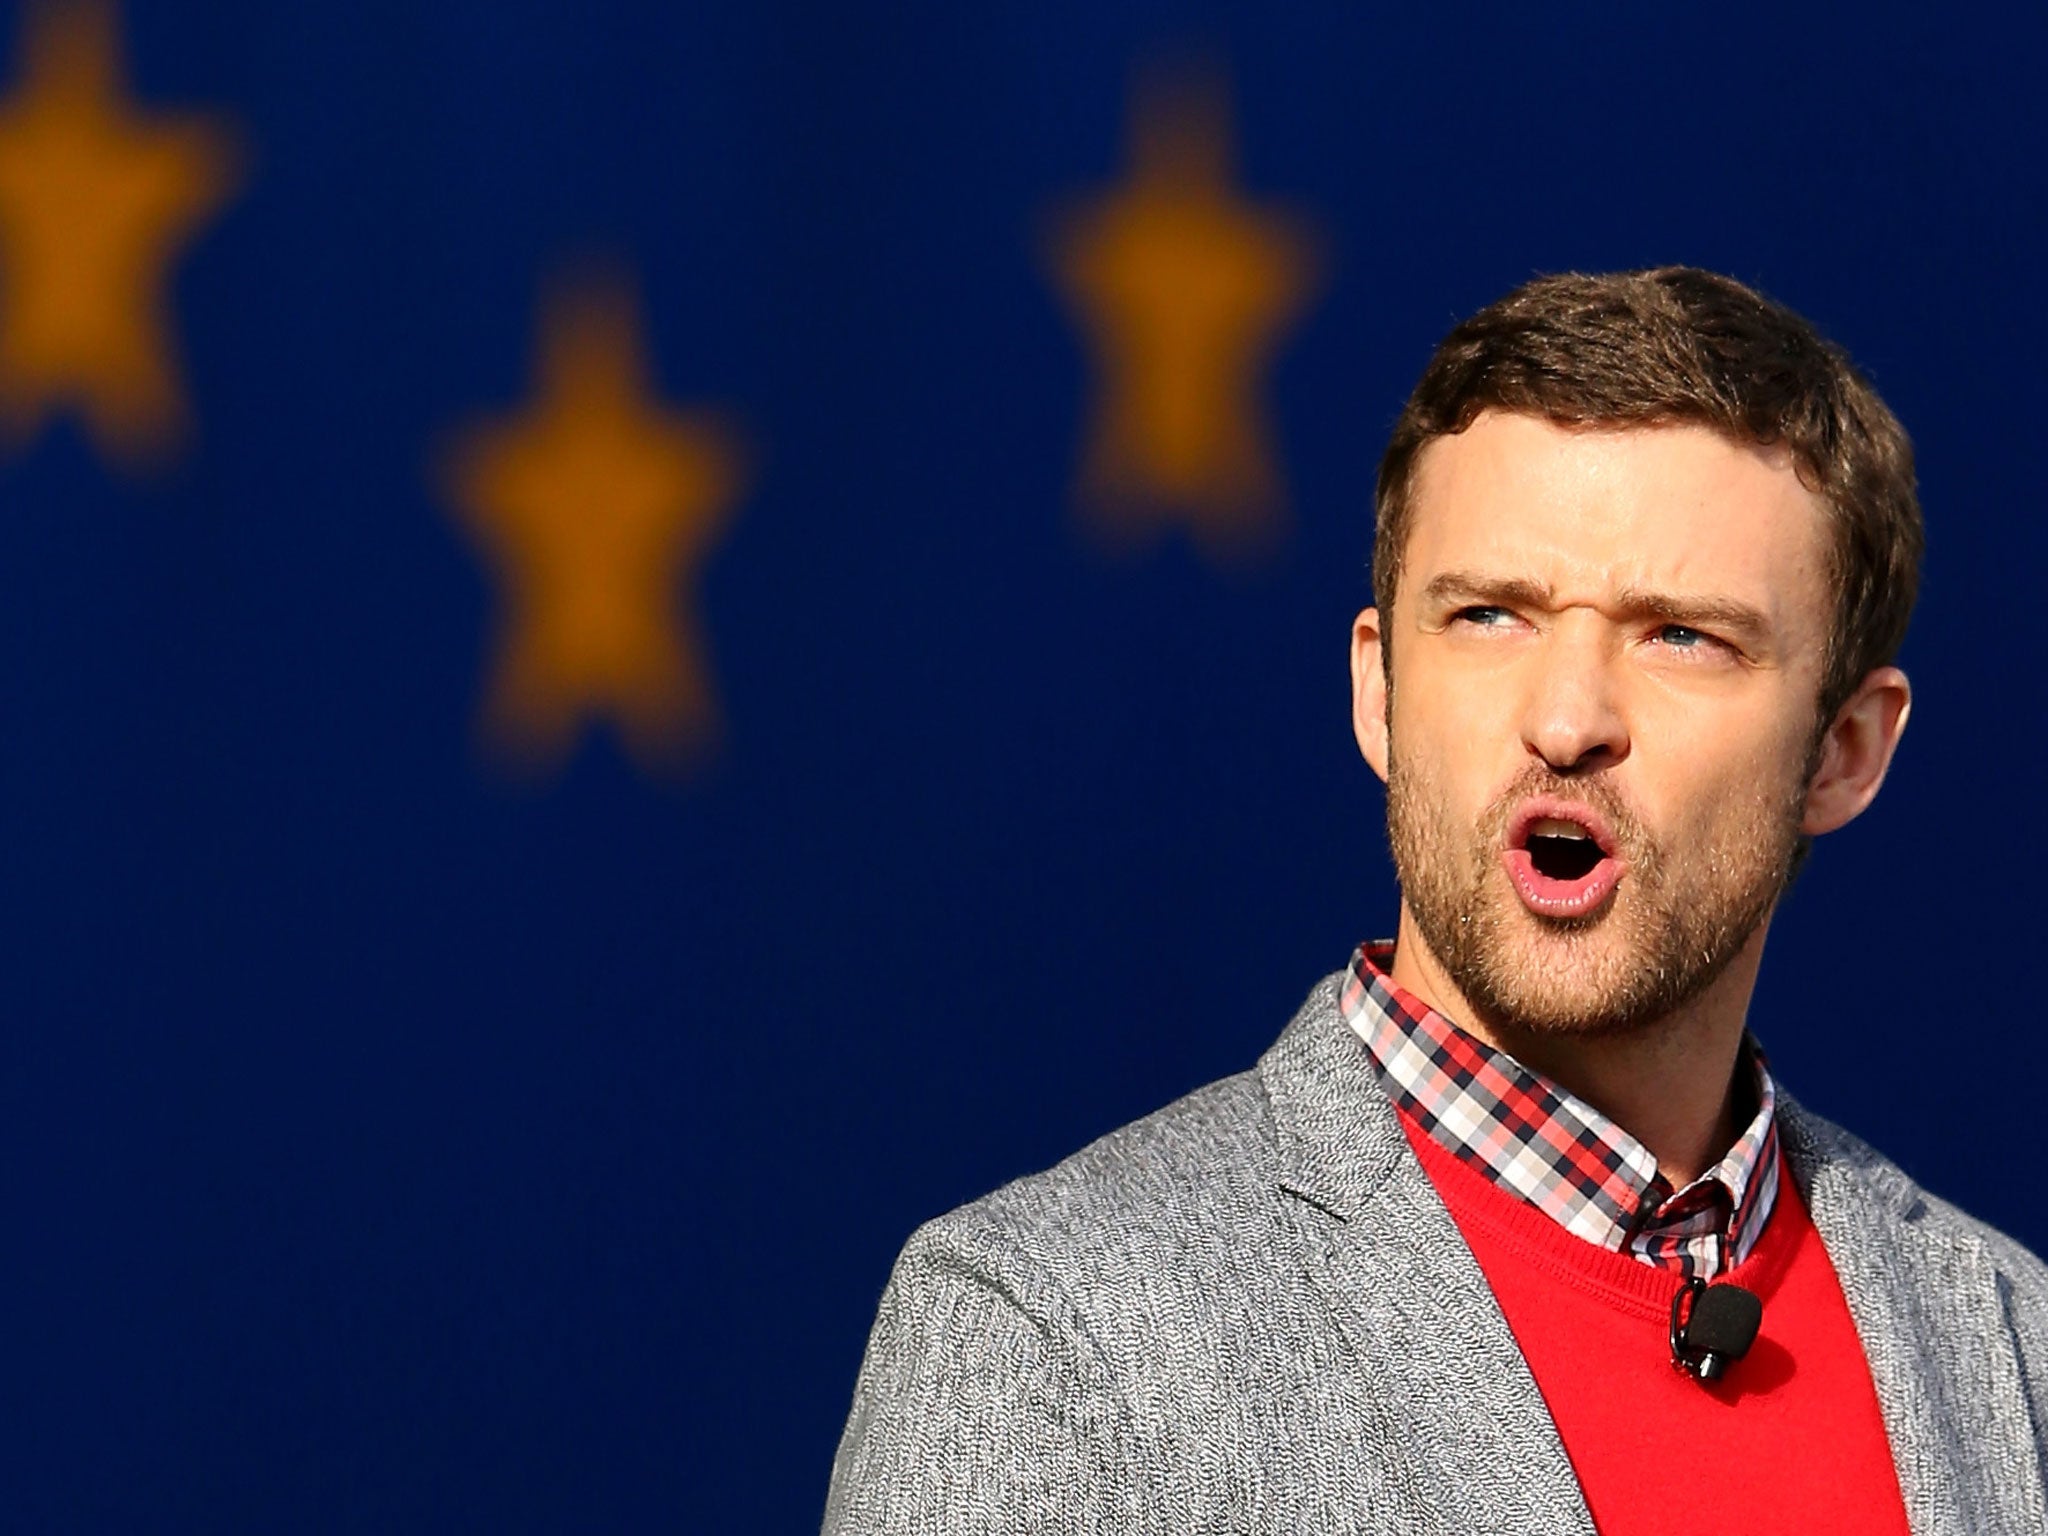 Justin Timberlake during the Opening Ceremony for the 39th Ryder Cup on September 27, 2012 in Medinah, Illinois.